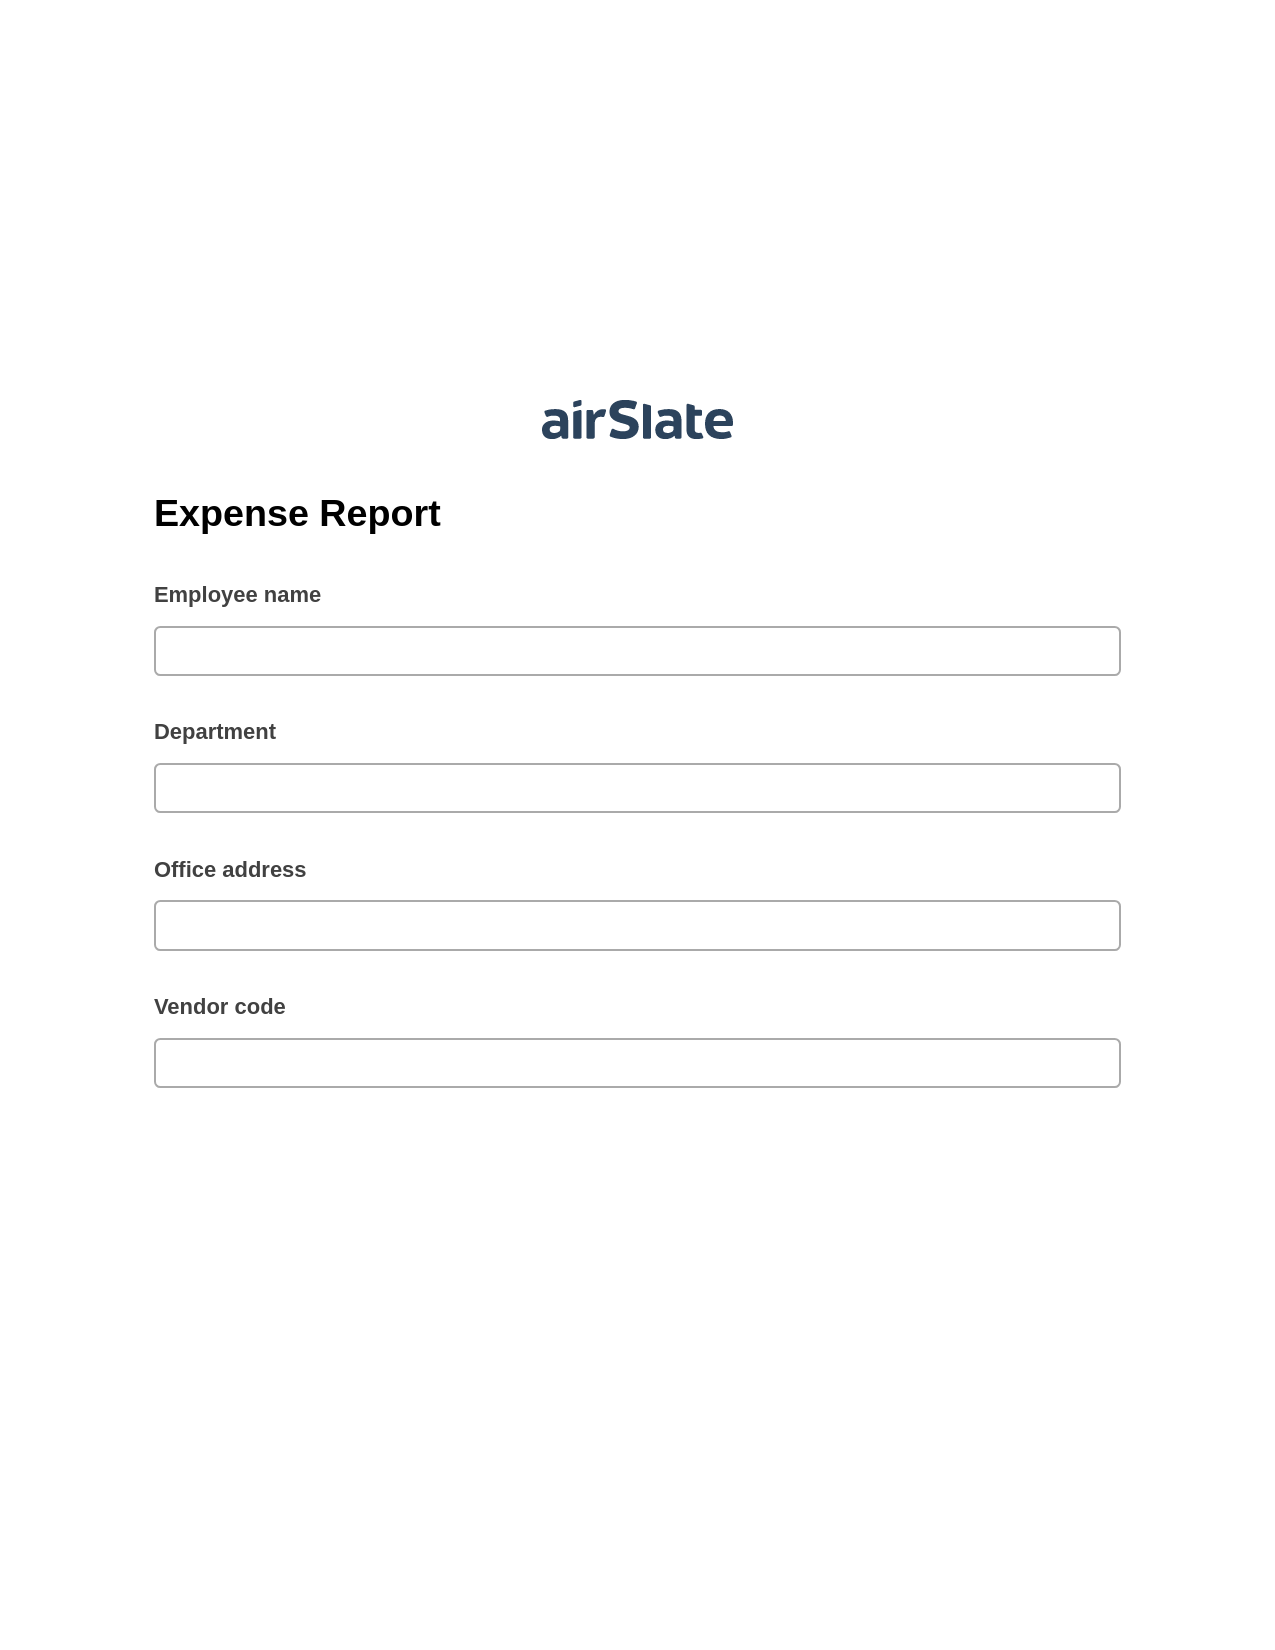 Expense Report Pre-fill Dropdown from Airtable, Send Mailchimp Campaign Bot, Export to Excel 365 Bot